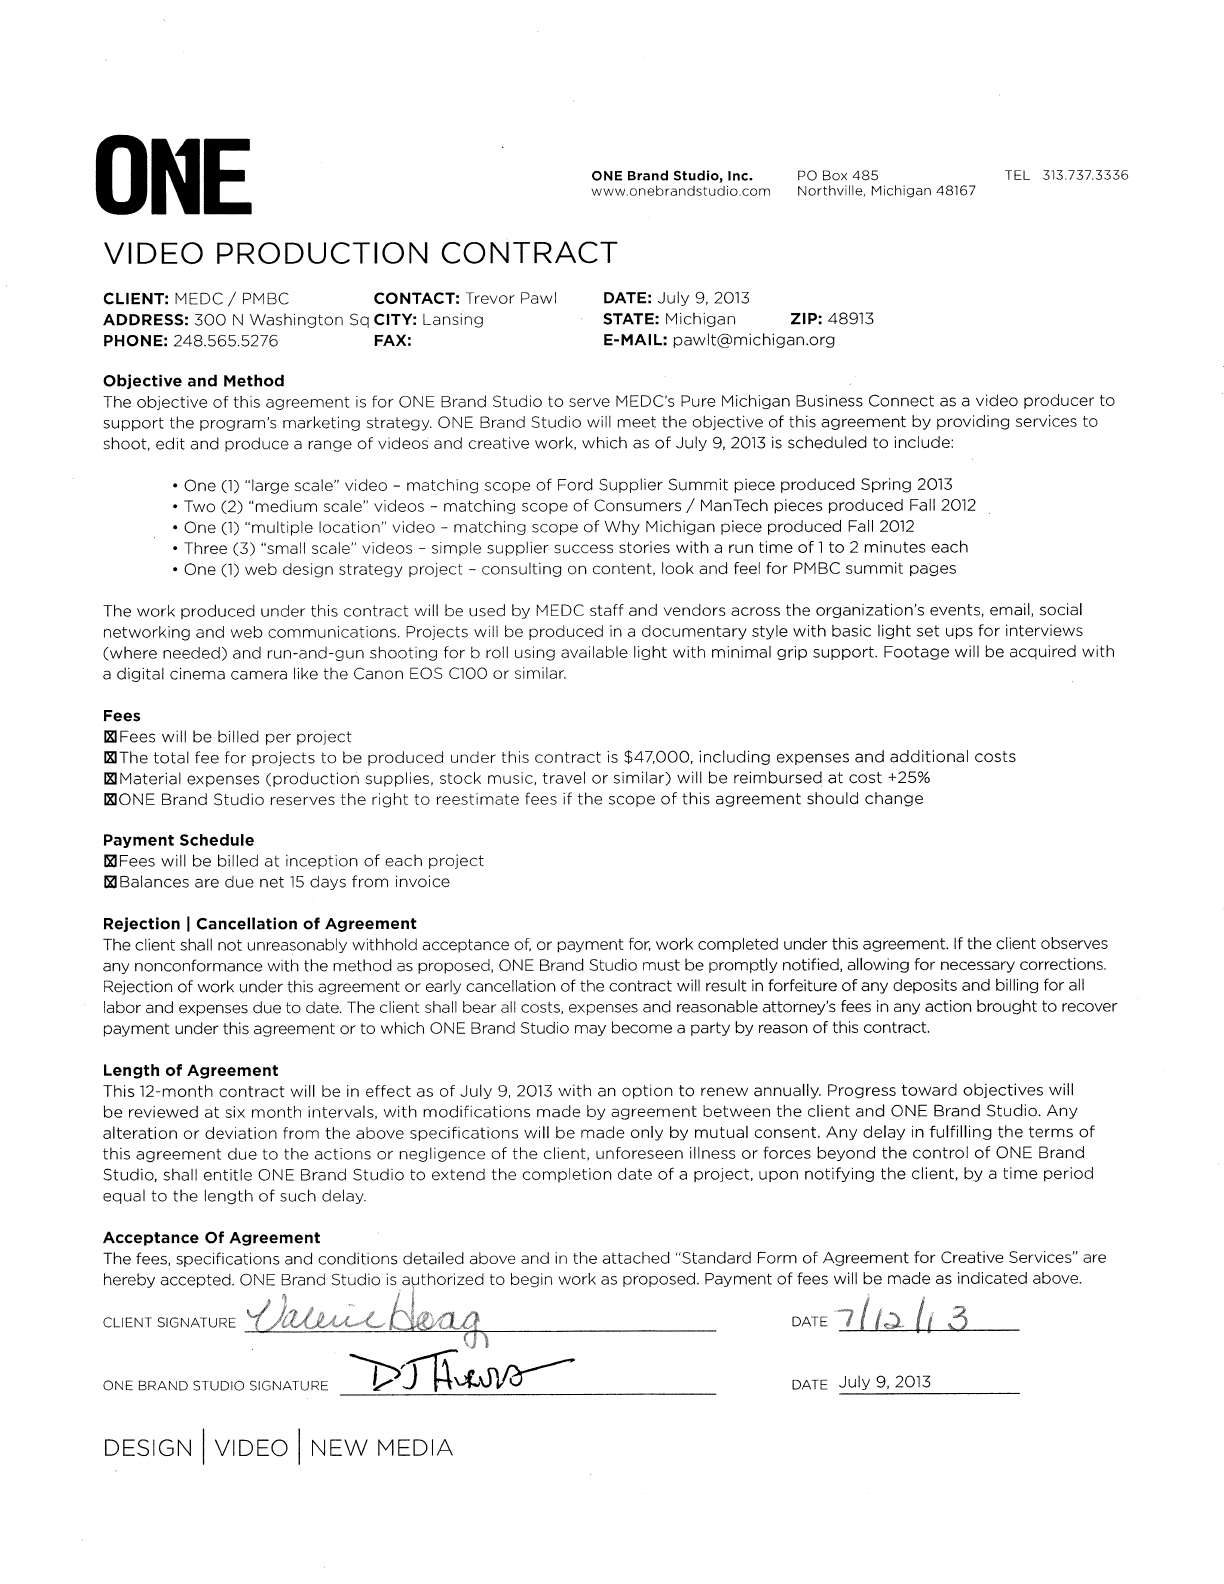 video-production-contract-template-1-41